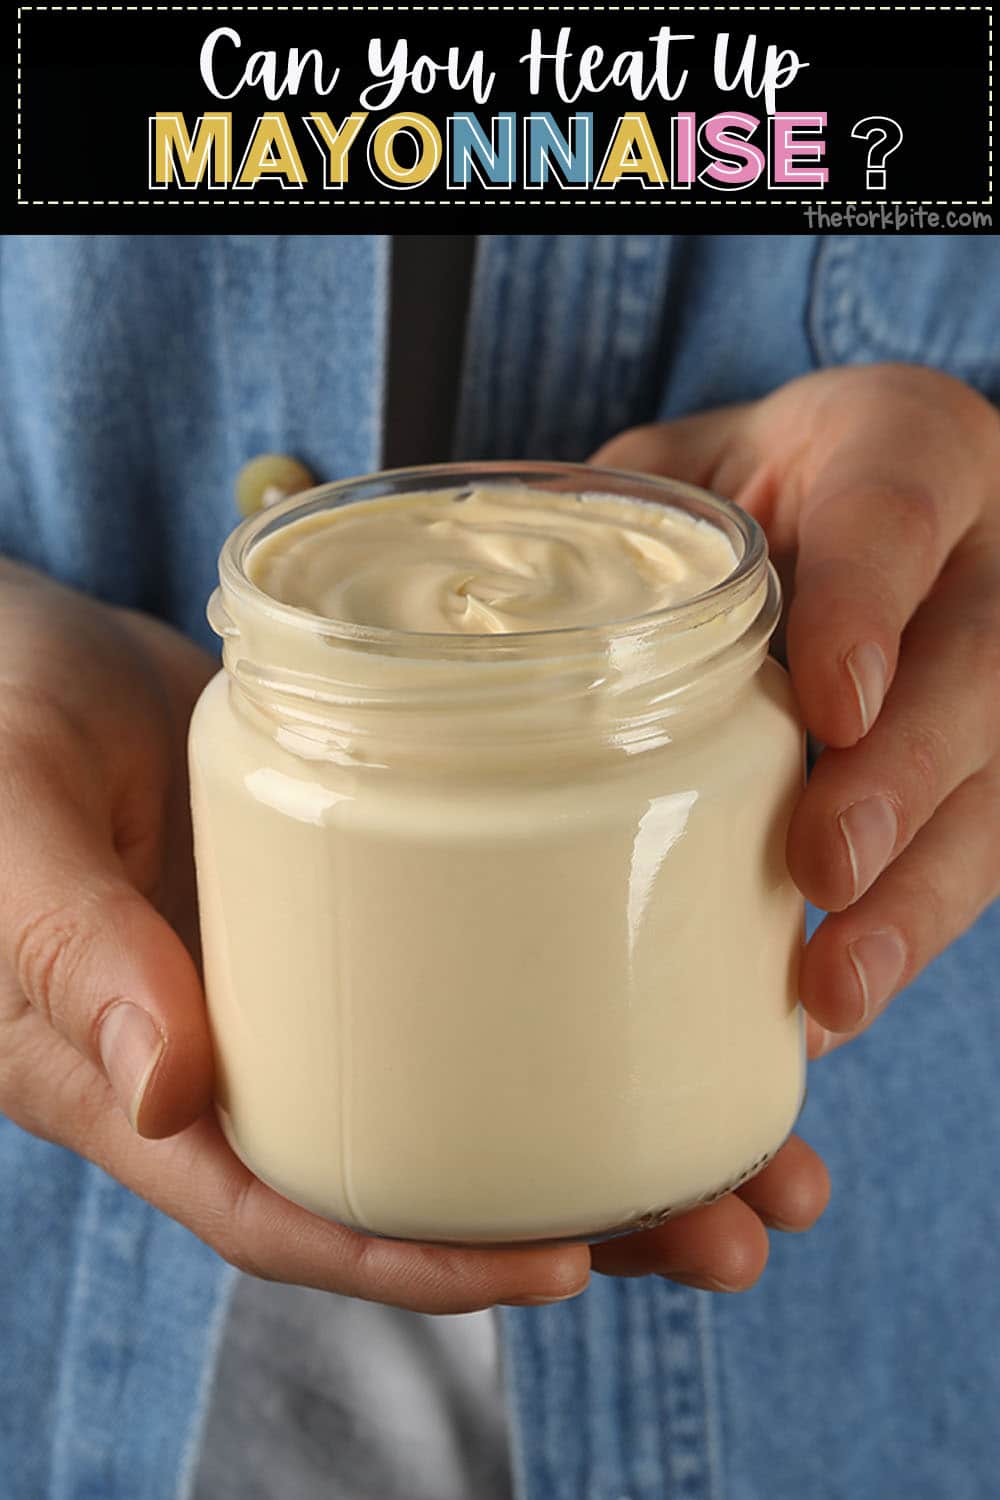 Can You Heat Up Mayonnaise? Yes, as long as you warm it on a low, steady heat and make sure not to overheat it, you can warm it successfully.